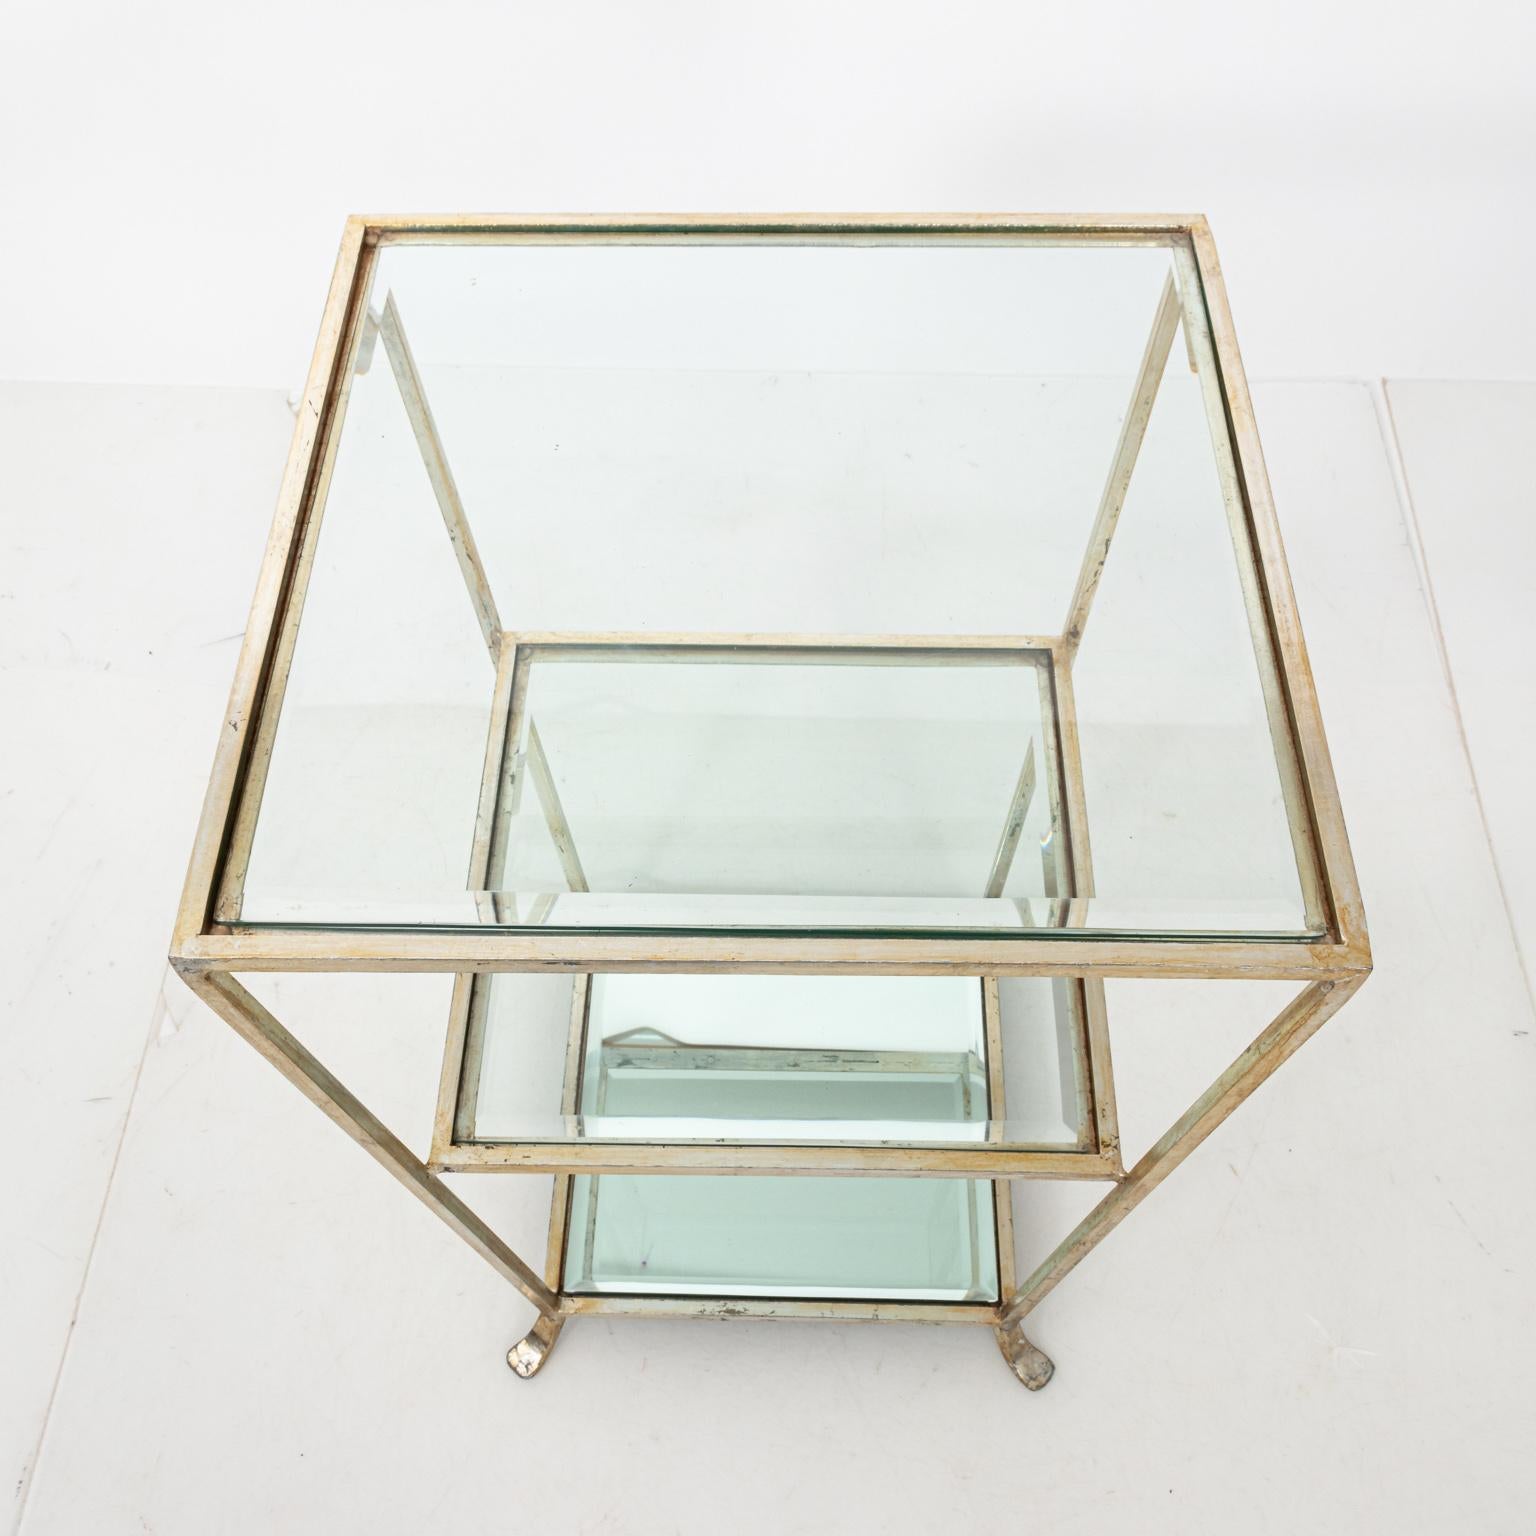 Three-tier metal side table with silver leaf, circa 1980s. The piece also features two beveled glass tops with a singular beveled mirror glass top on the lowest shelf. Please note of wear consistent with age including loss to silver leaf and heavy